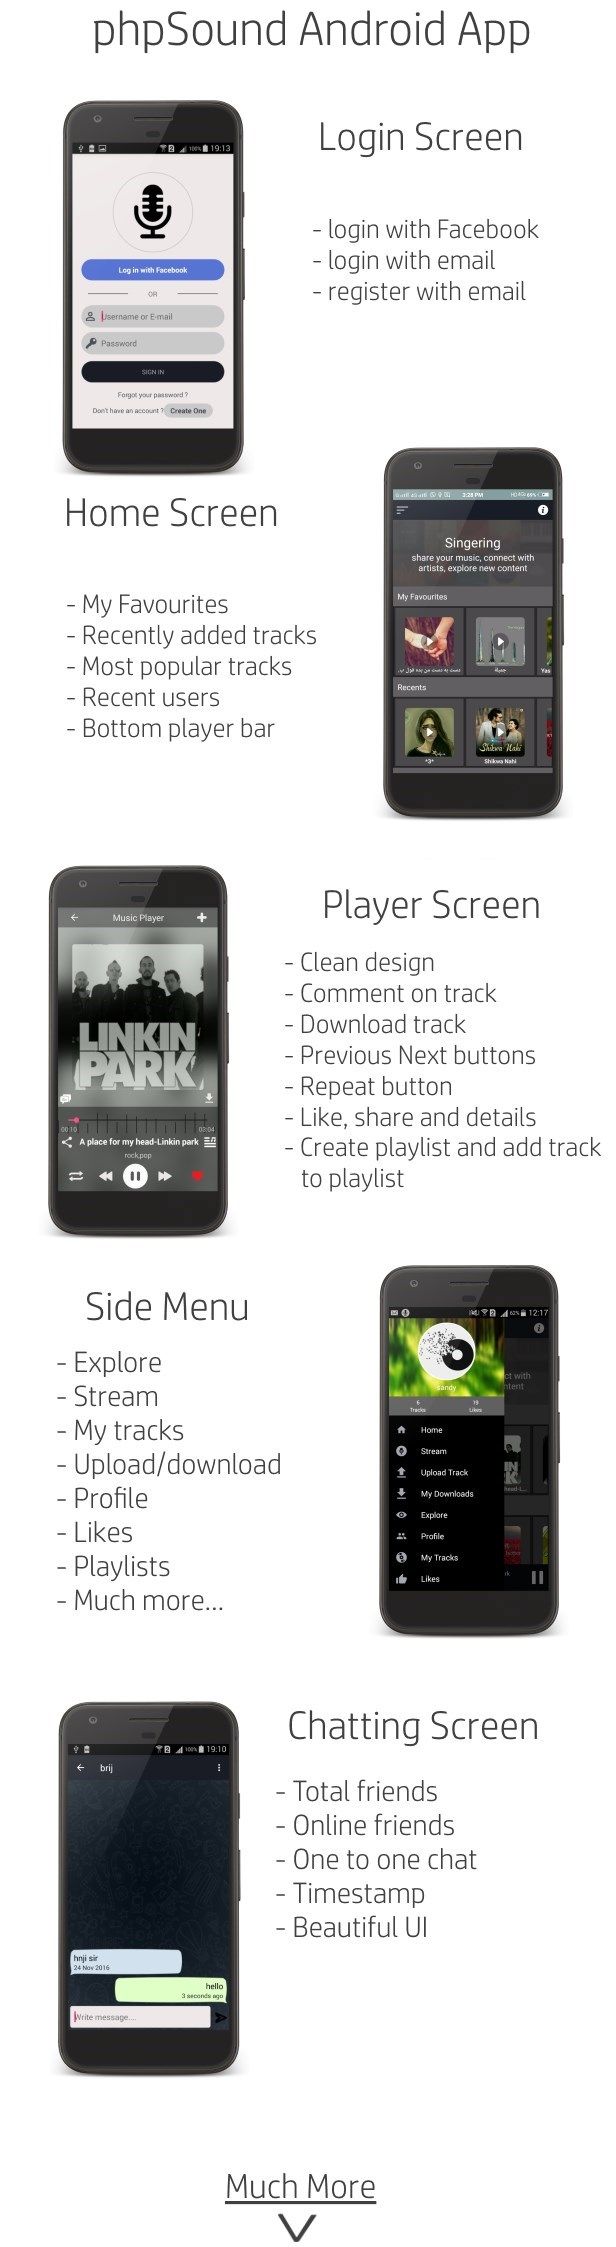 phpSound Android App - 1